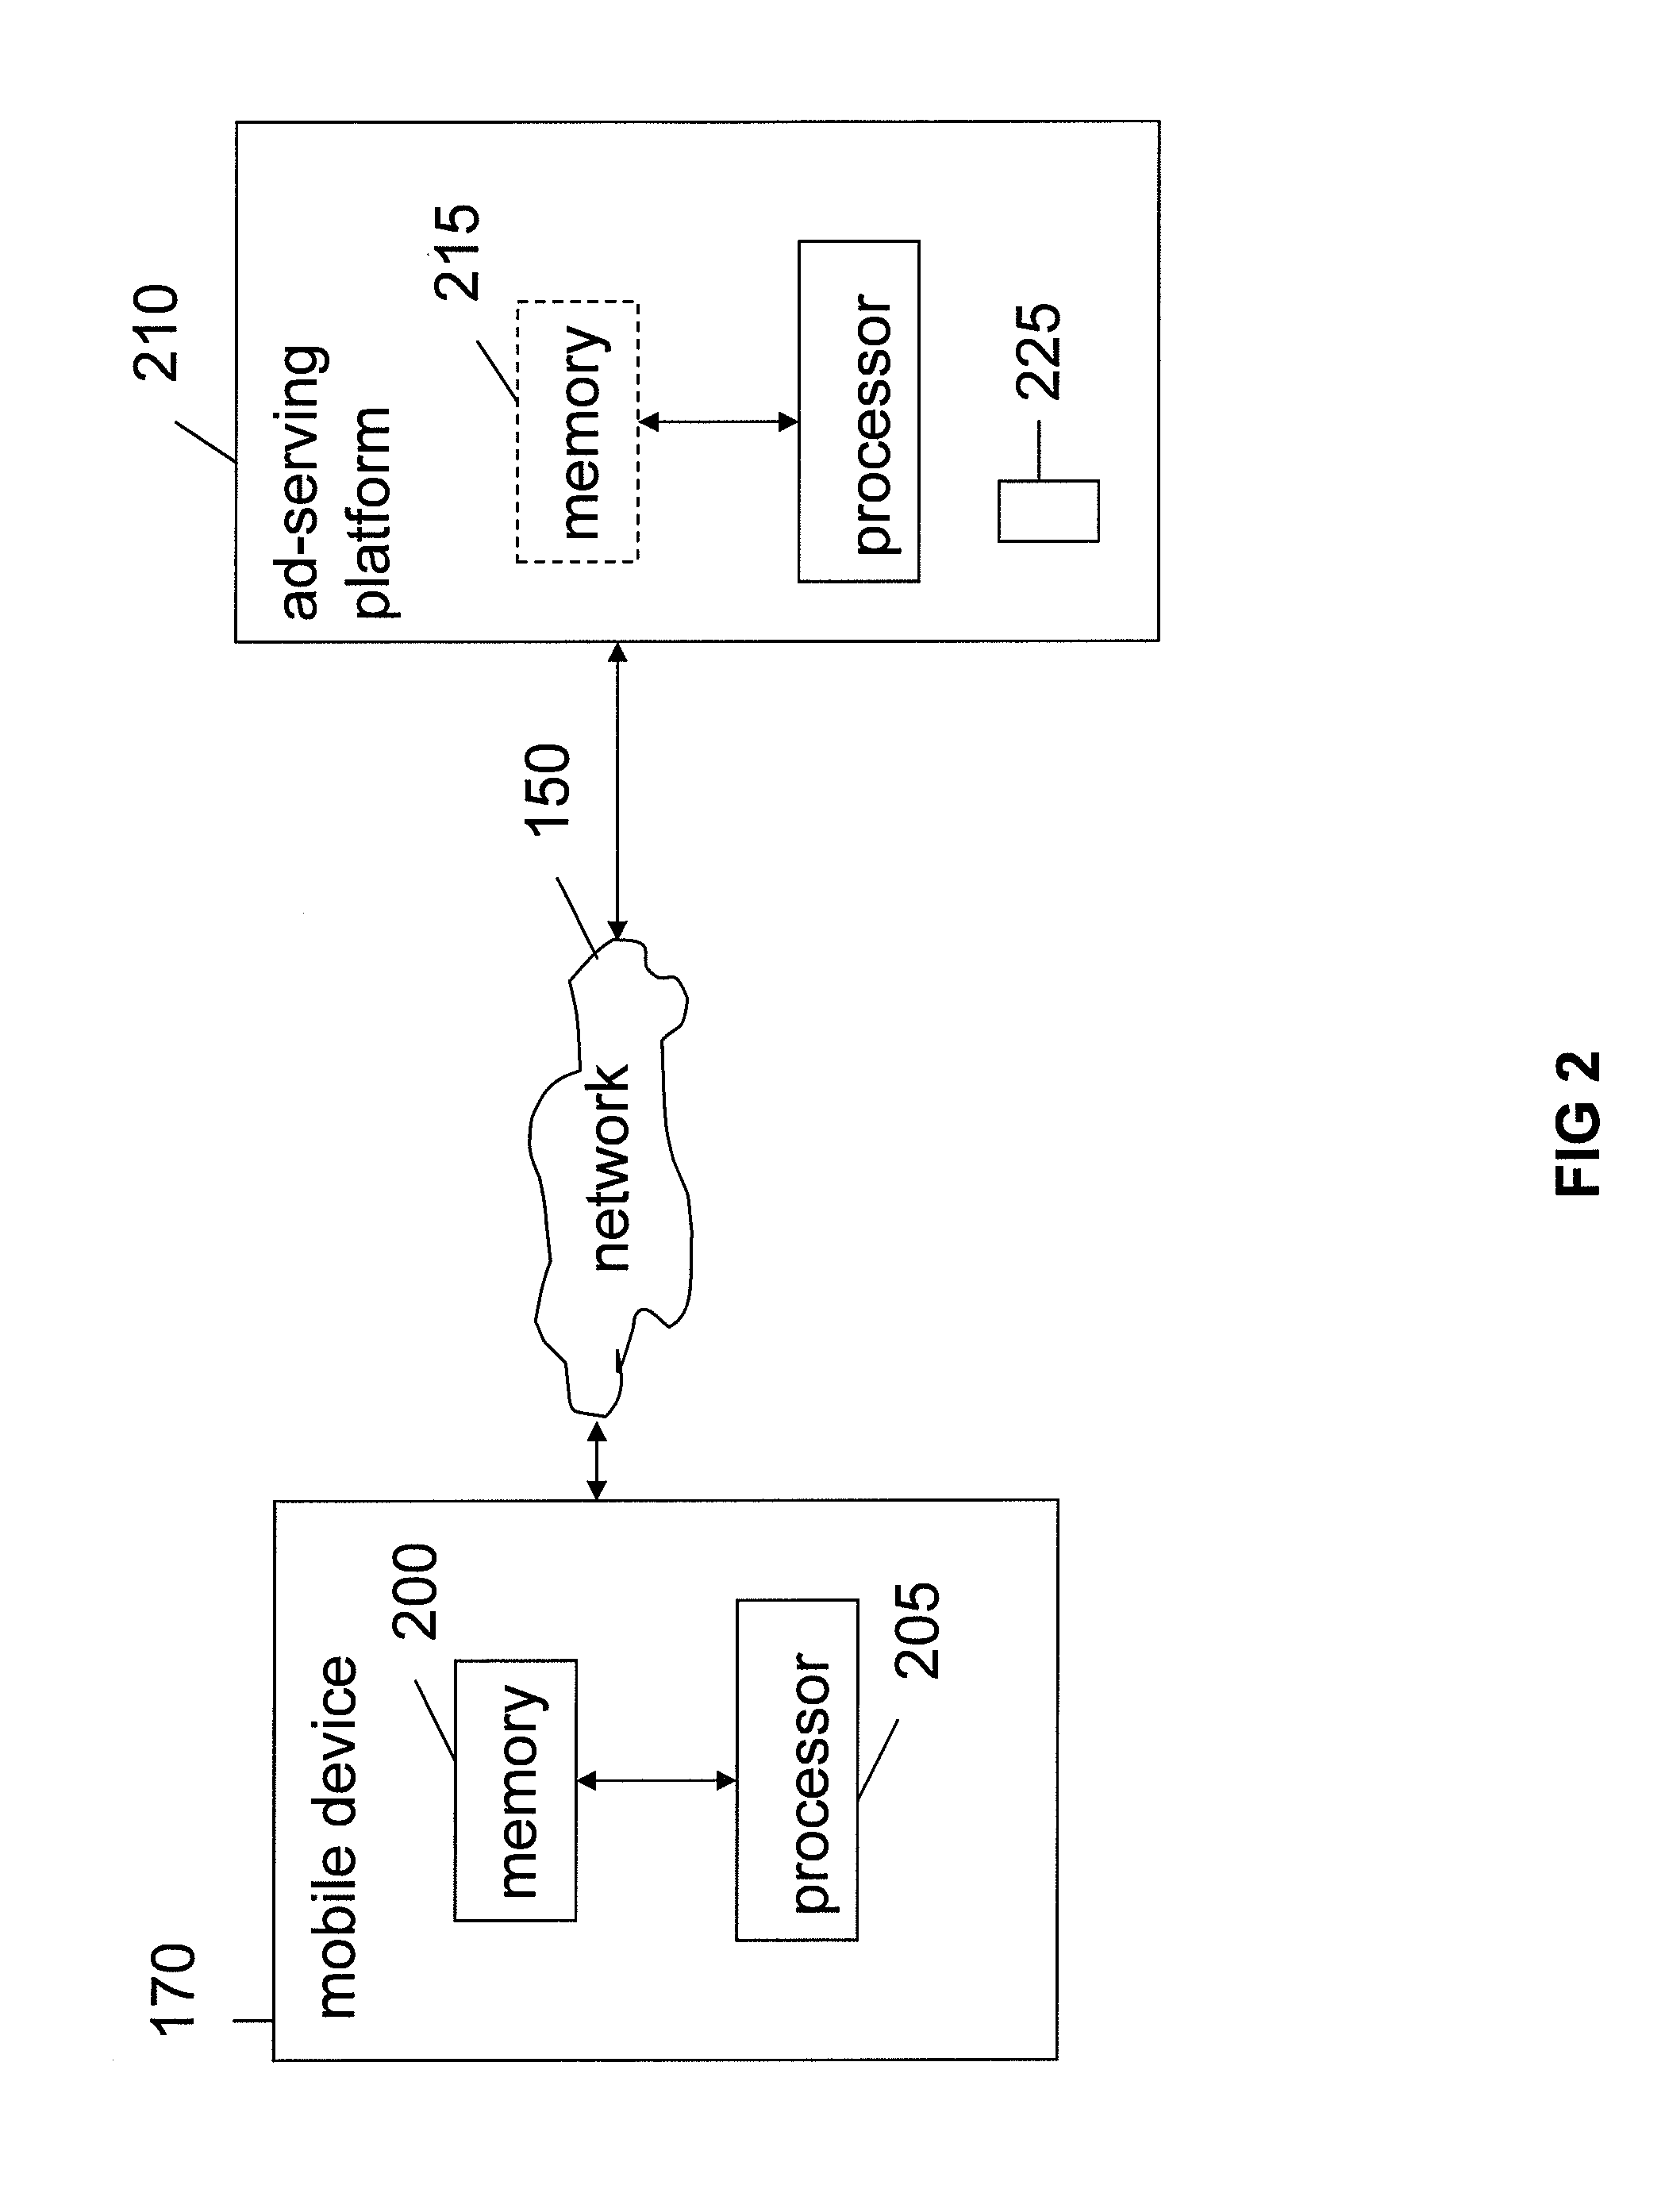 Targeted Advertisement Transmission and Delivery in a Bandwidth Limited Multicast Wireless System